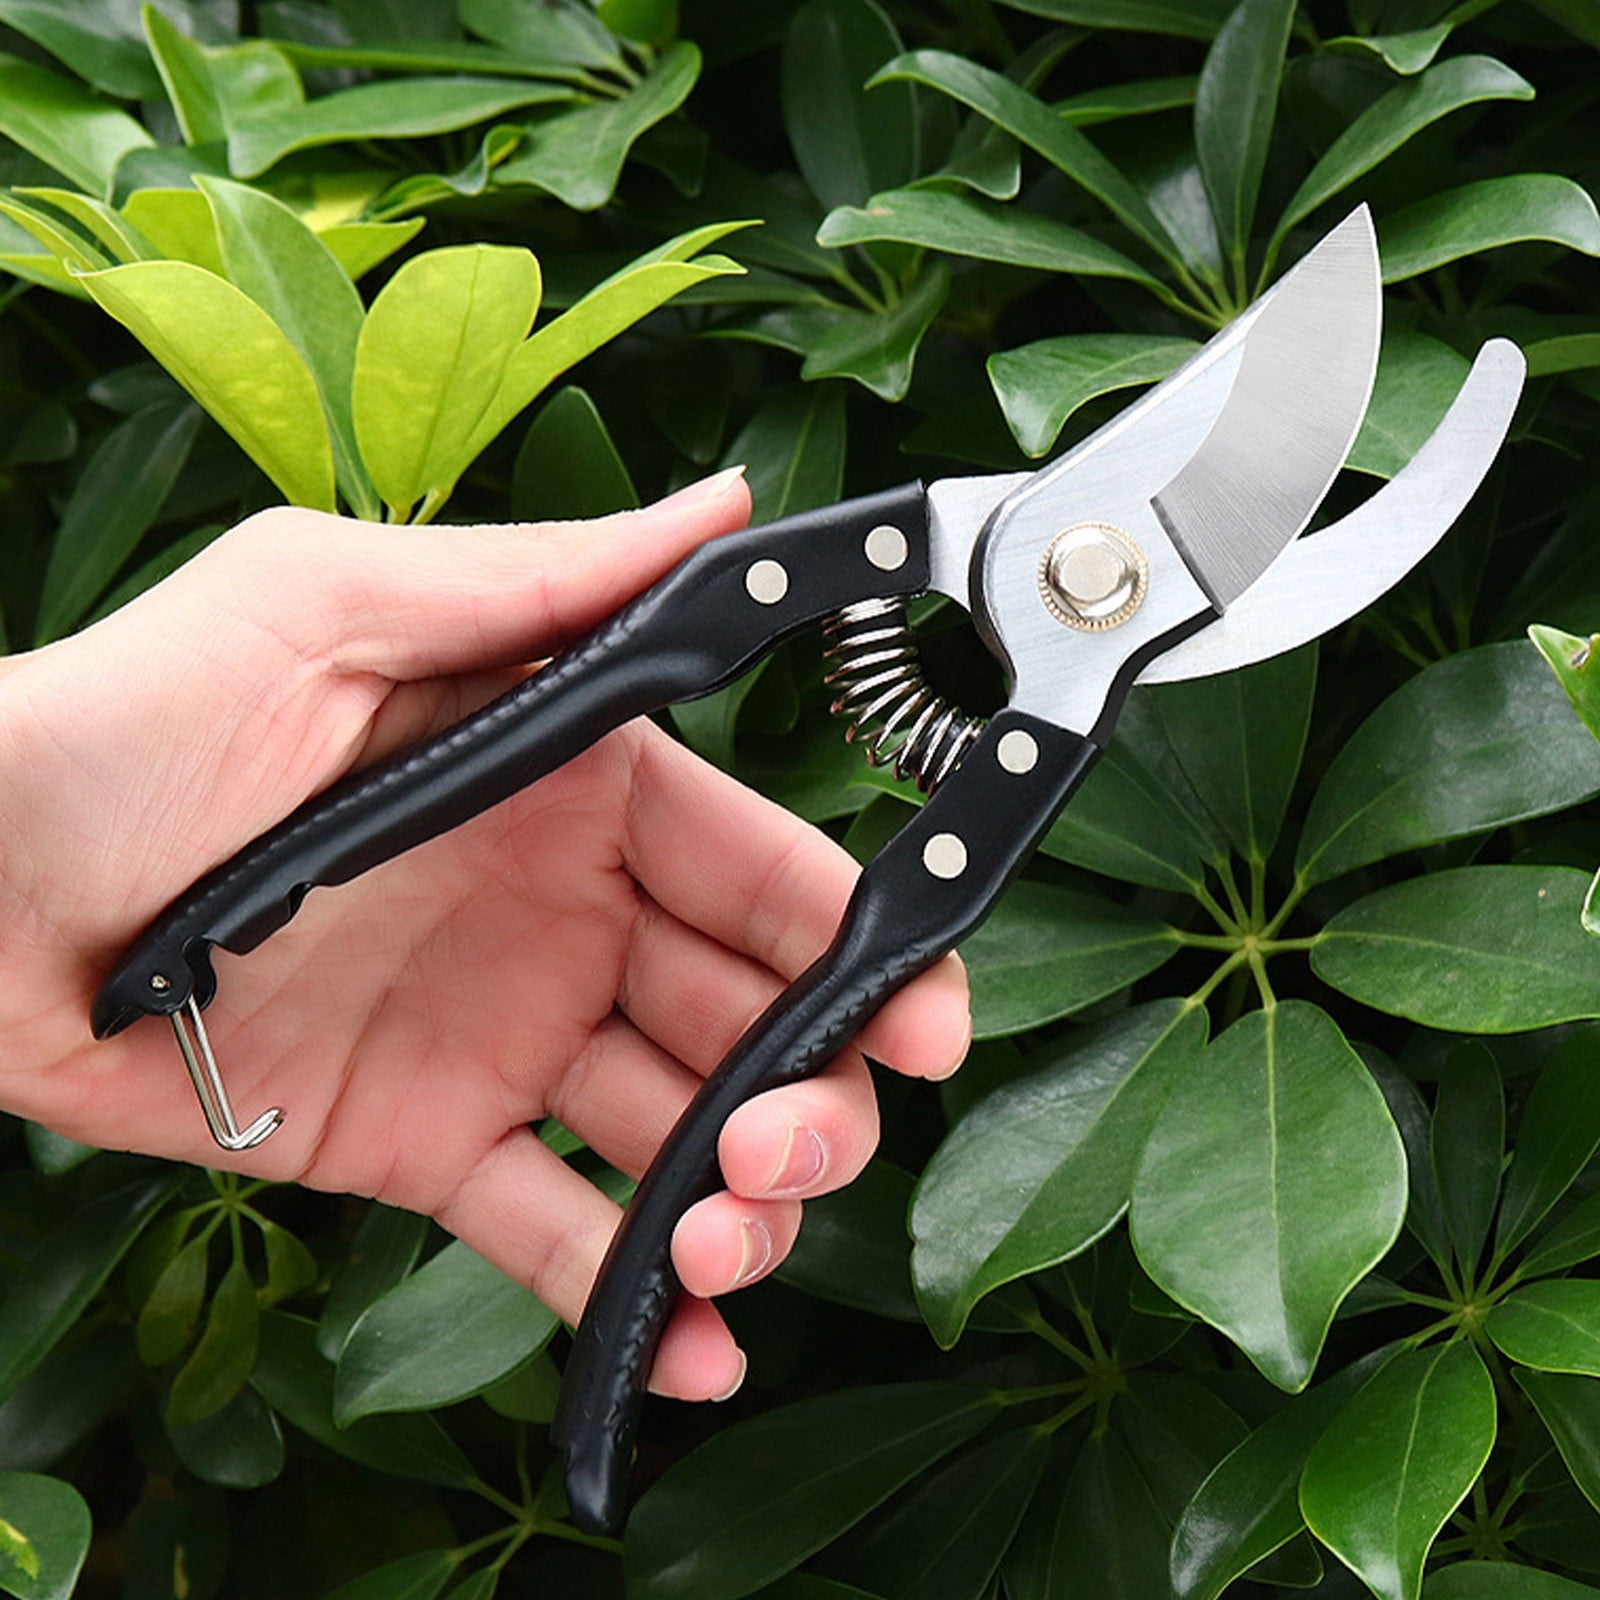 Up to 65% Off Aoujea Garden Pruning Shears Stainless Steel Blades Handheld  Pruners Premium Bypass Pruning Shears For Your Garden Tools on Sale 